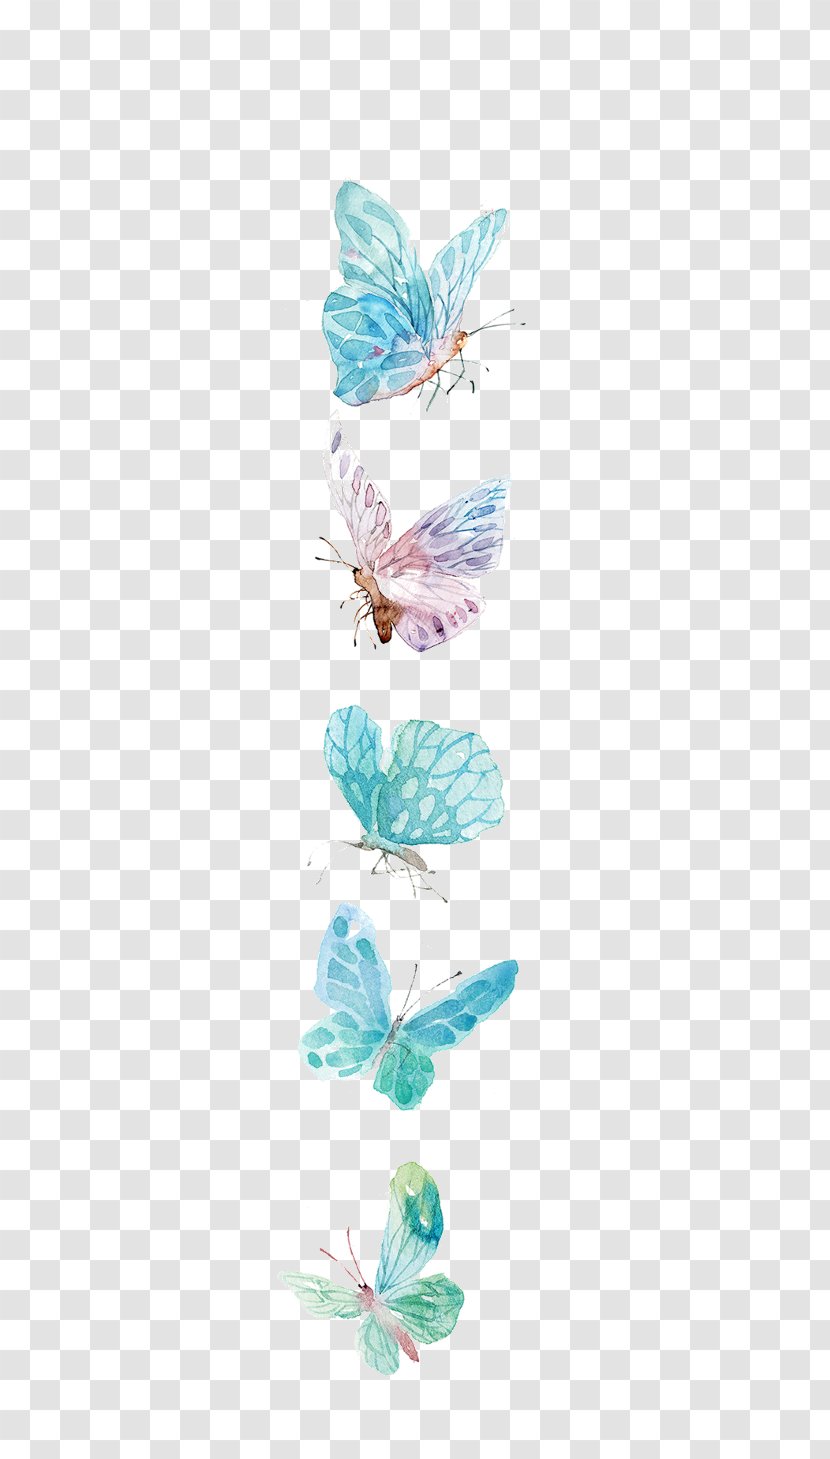 Butterfly Watercolor Painting Clip Art - Organism Transparent PNG